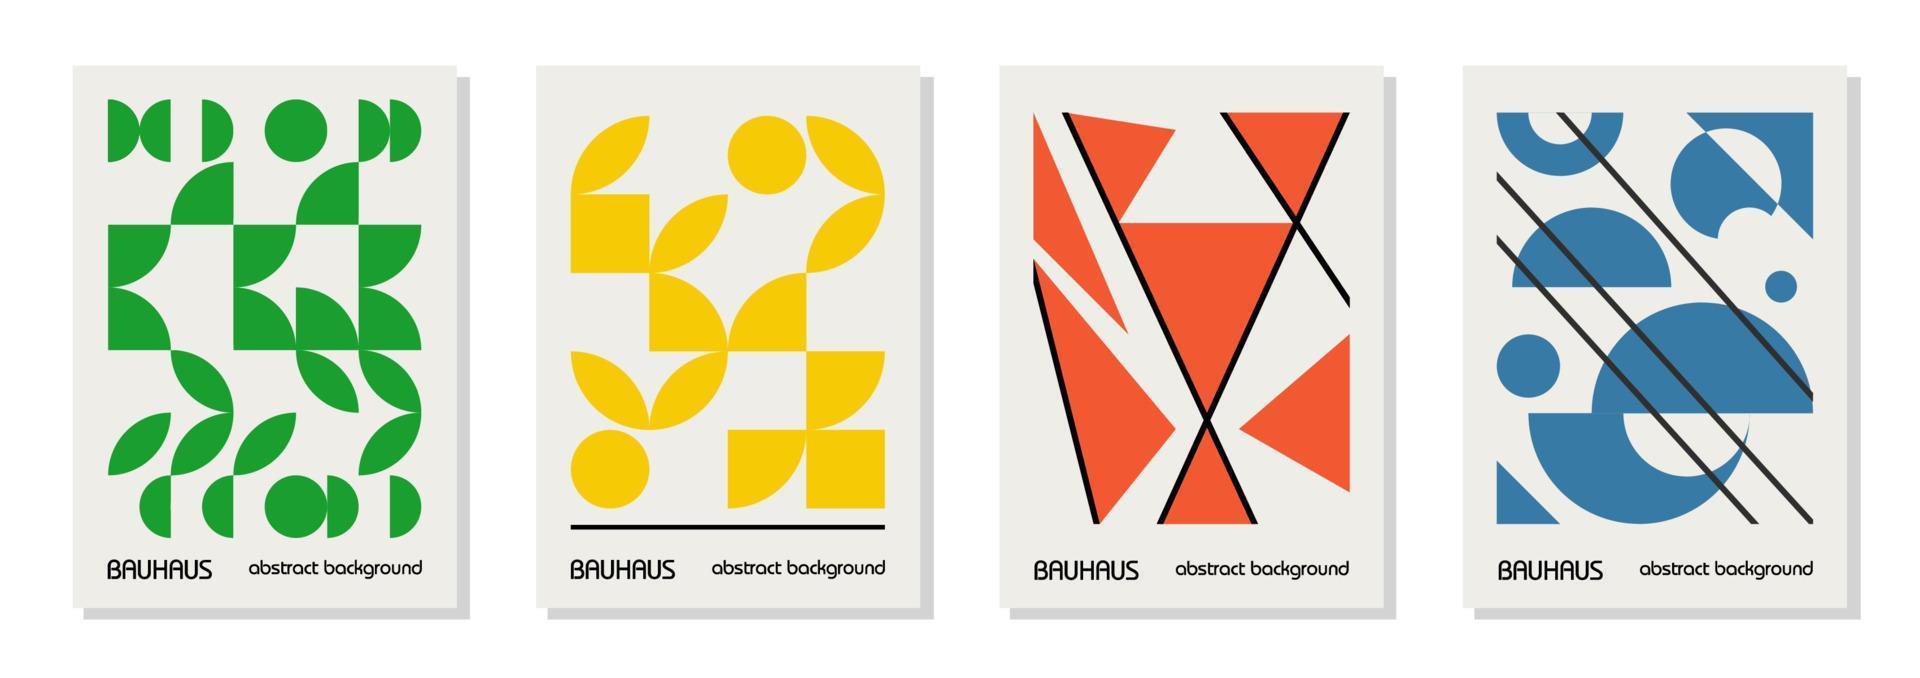 Set of 4 minimal vintage 20s geometric design posters, wall art, template, layout with primitive shapes elements. Bauhaus retro pattern background, vector abstract circle, triangle and square line art